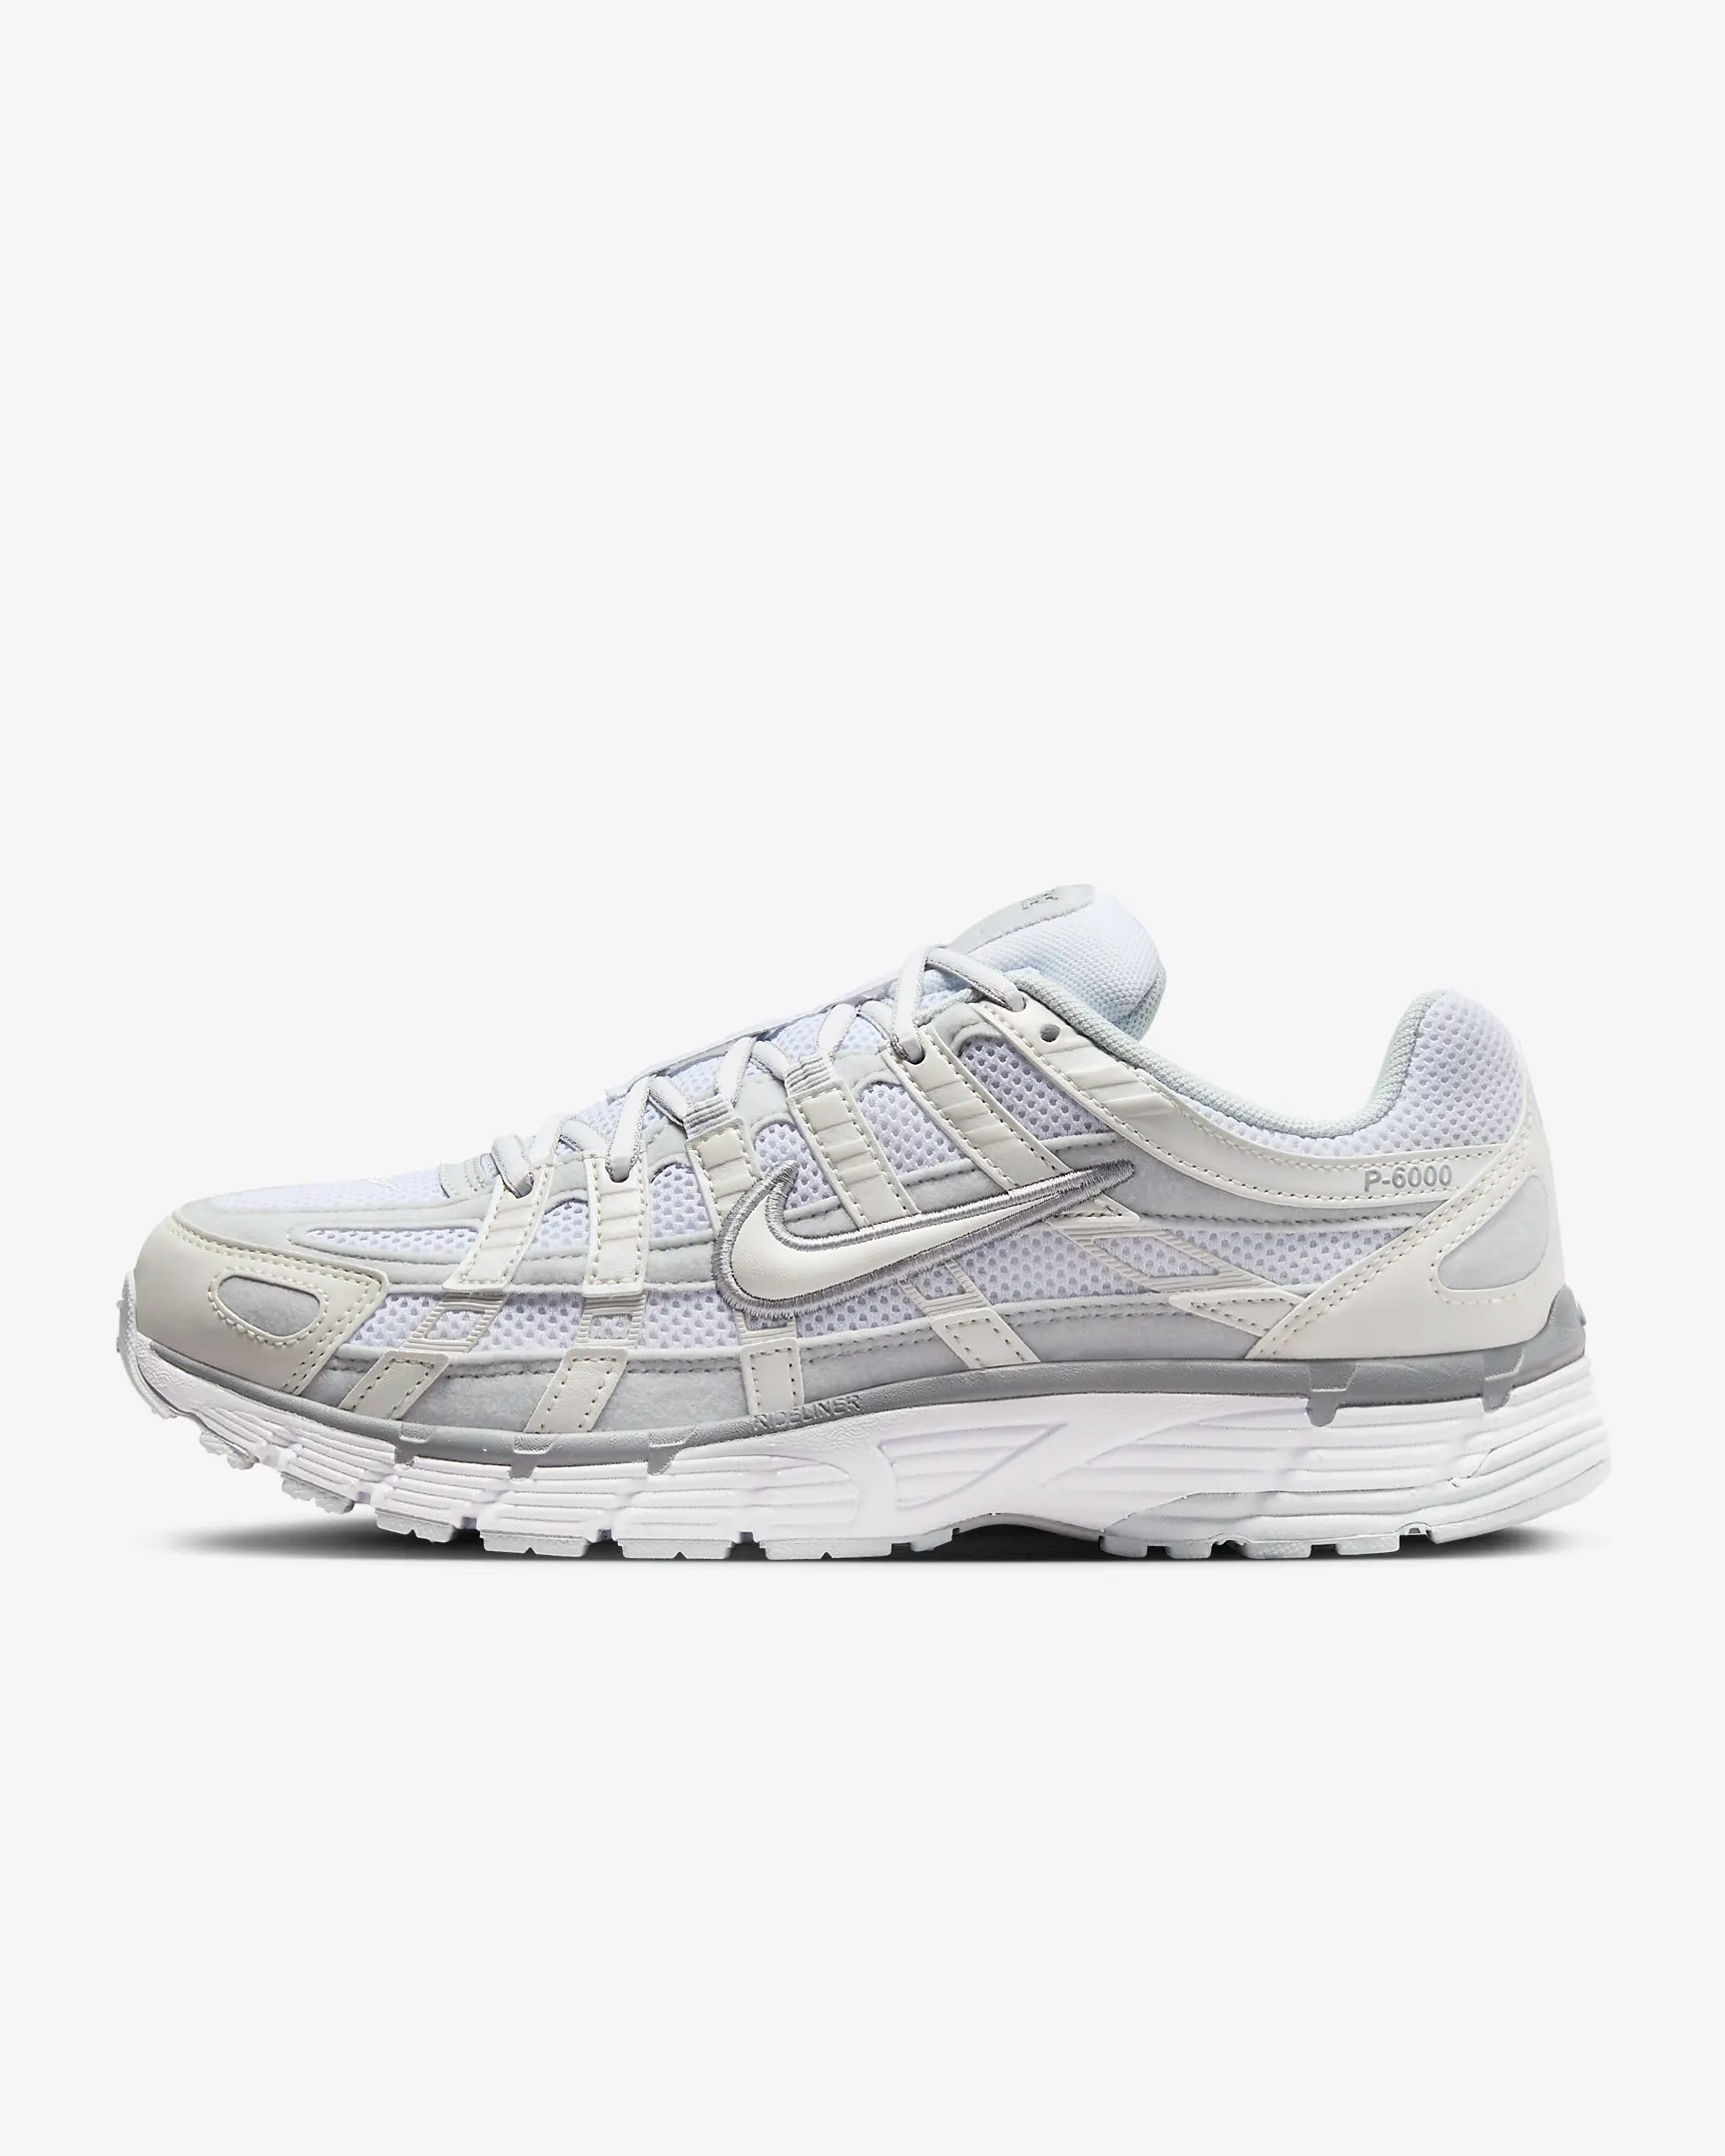 Les P-6000 blanches, des chaussures de running // Source: Nike